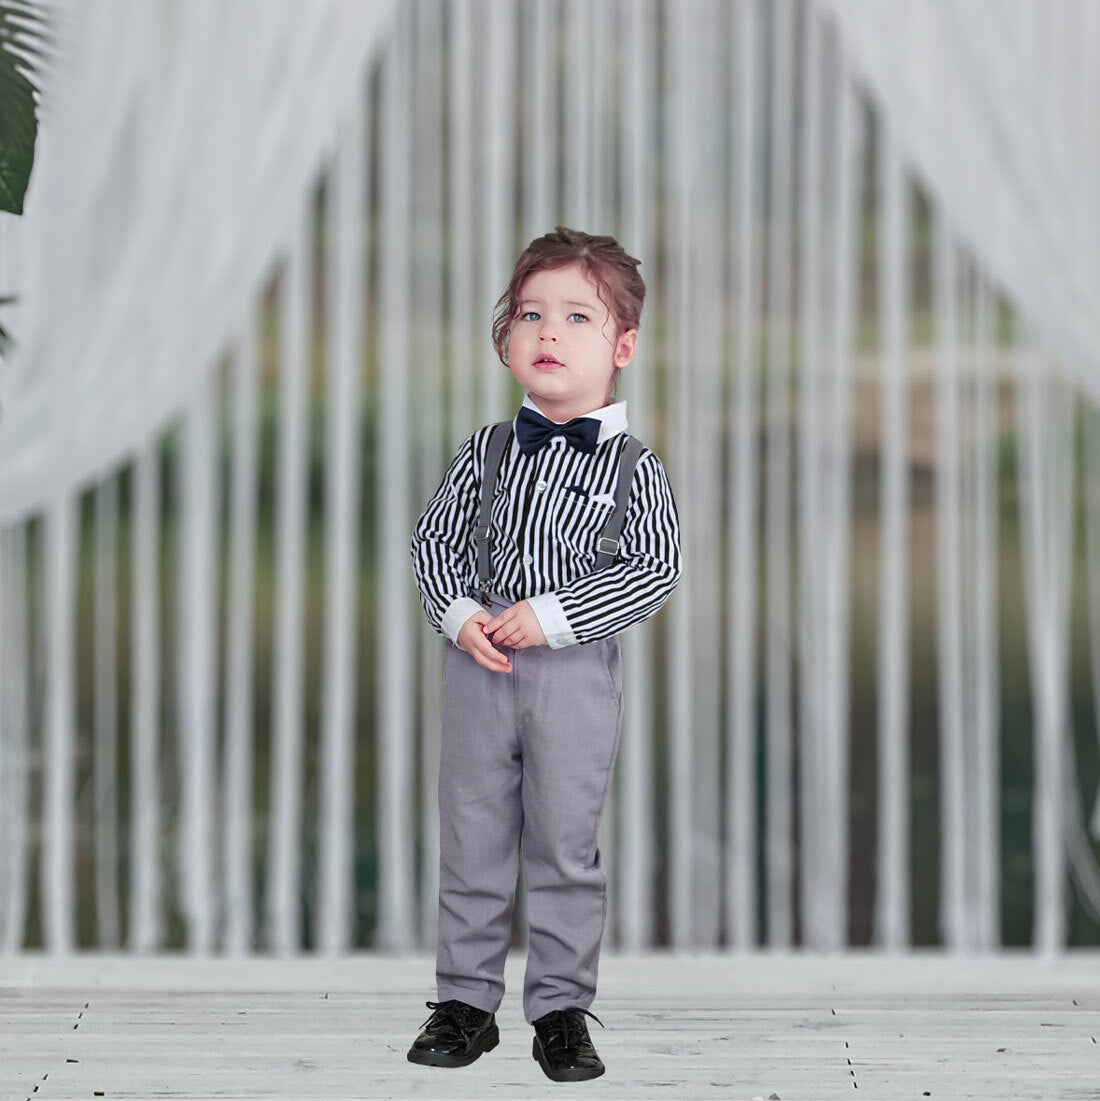 Toddler wearing grey pants and suspenders with striped blue shirt